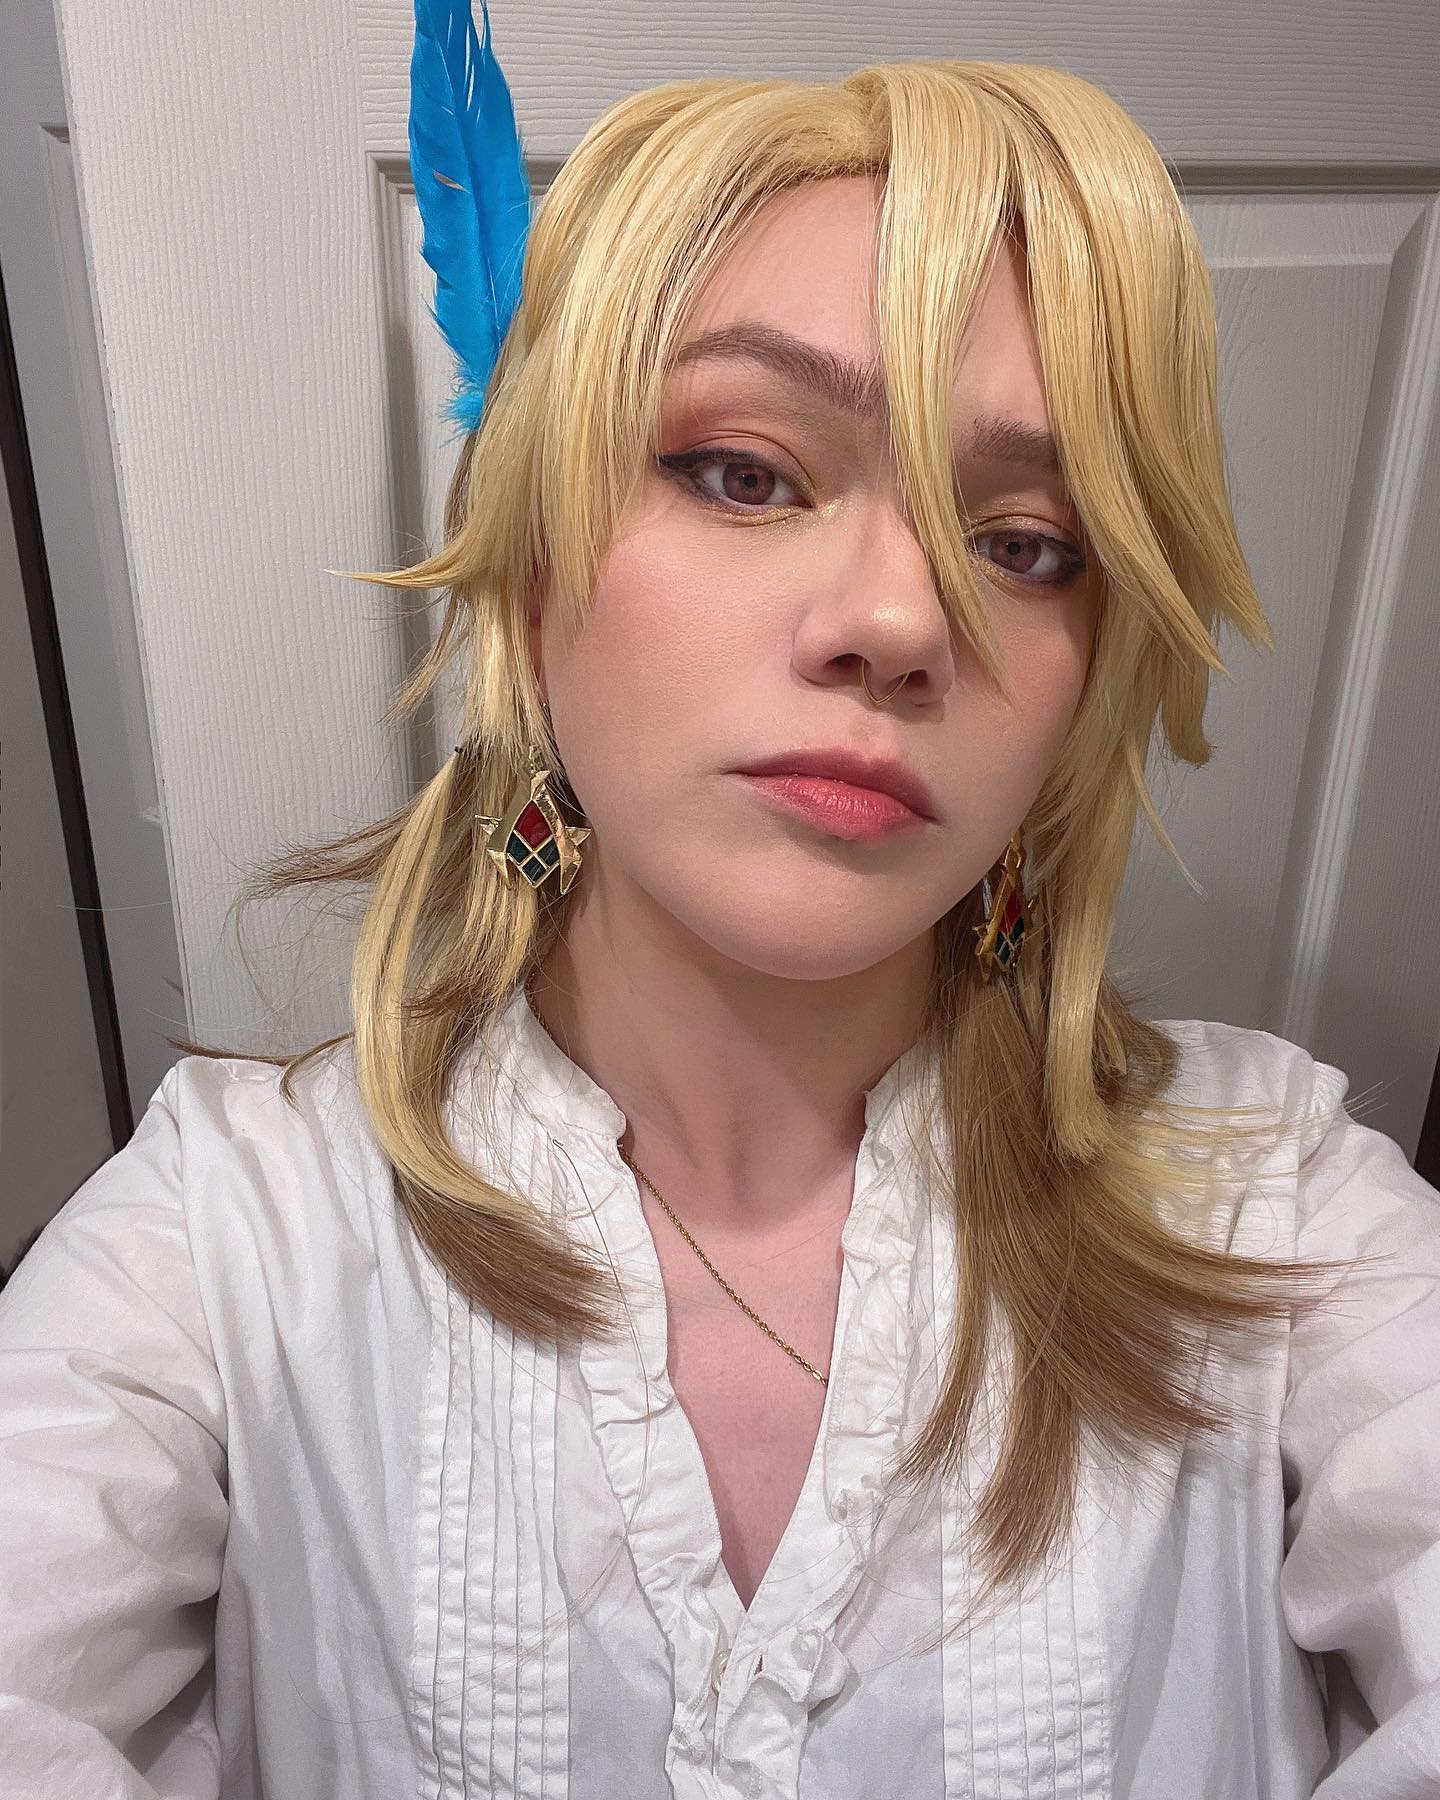 Posted this on my story the other day but I haven’t made a feed post in a while so hi 👀 I don’t play Genshin actually I’m just cosplaying it for my spouse 🫡
#genshinimpact #genshin #genshinimpactcosplay #genshincosplay #kaveh #kavehcosplay #cosplay